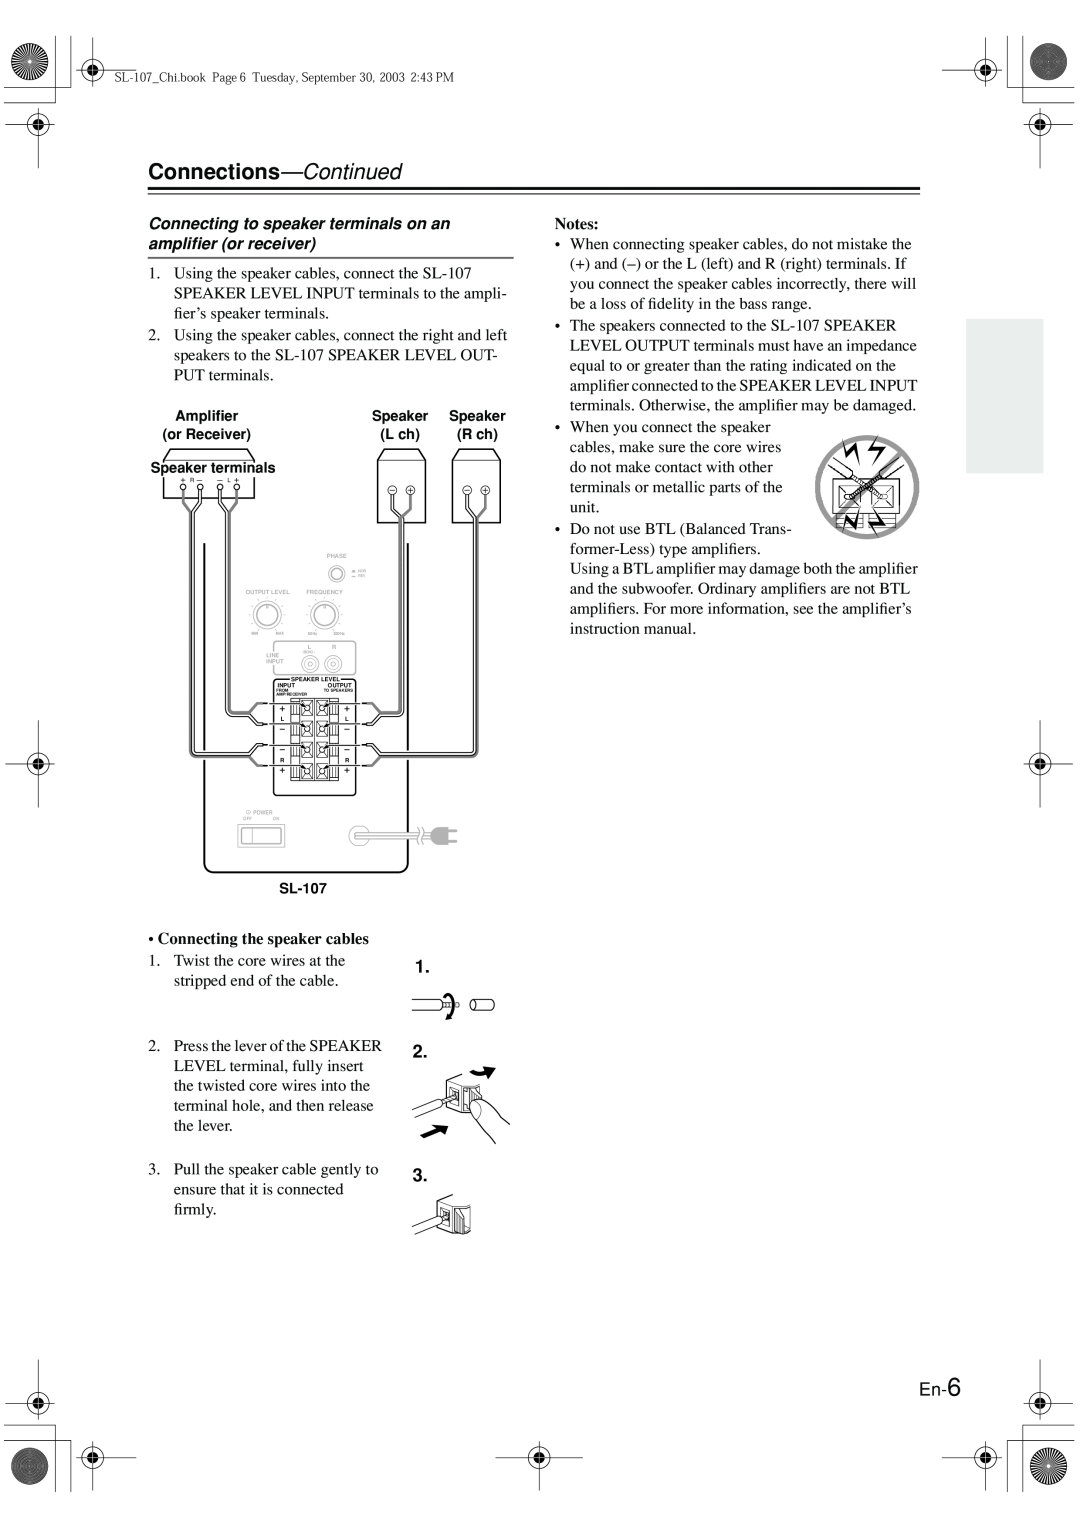 Onkyo SL-107 instruction manual Connections-Continued, En-6, Connecting the speaker cables 